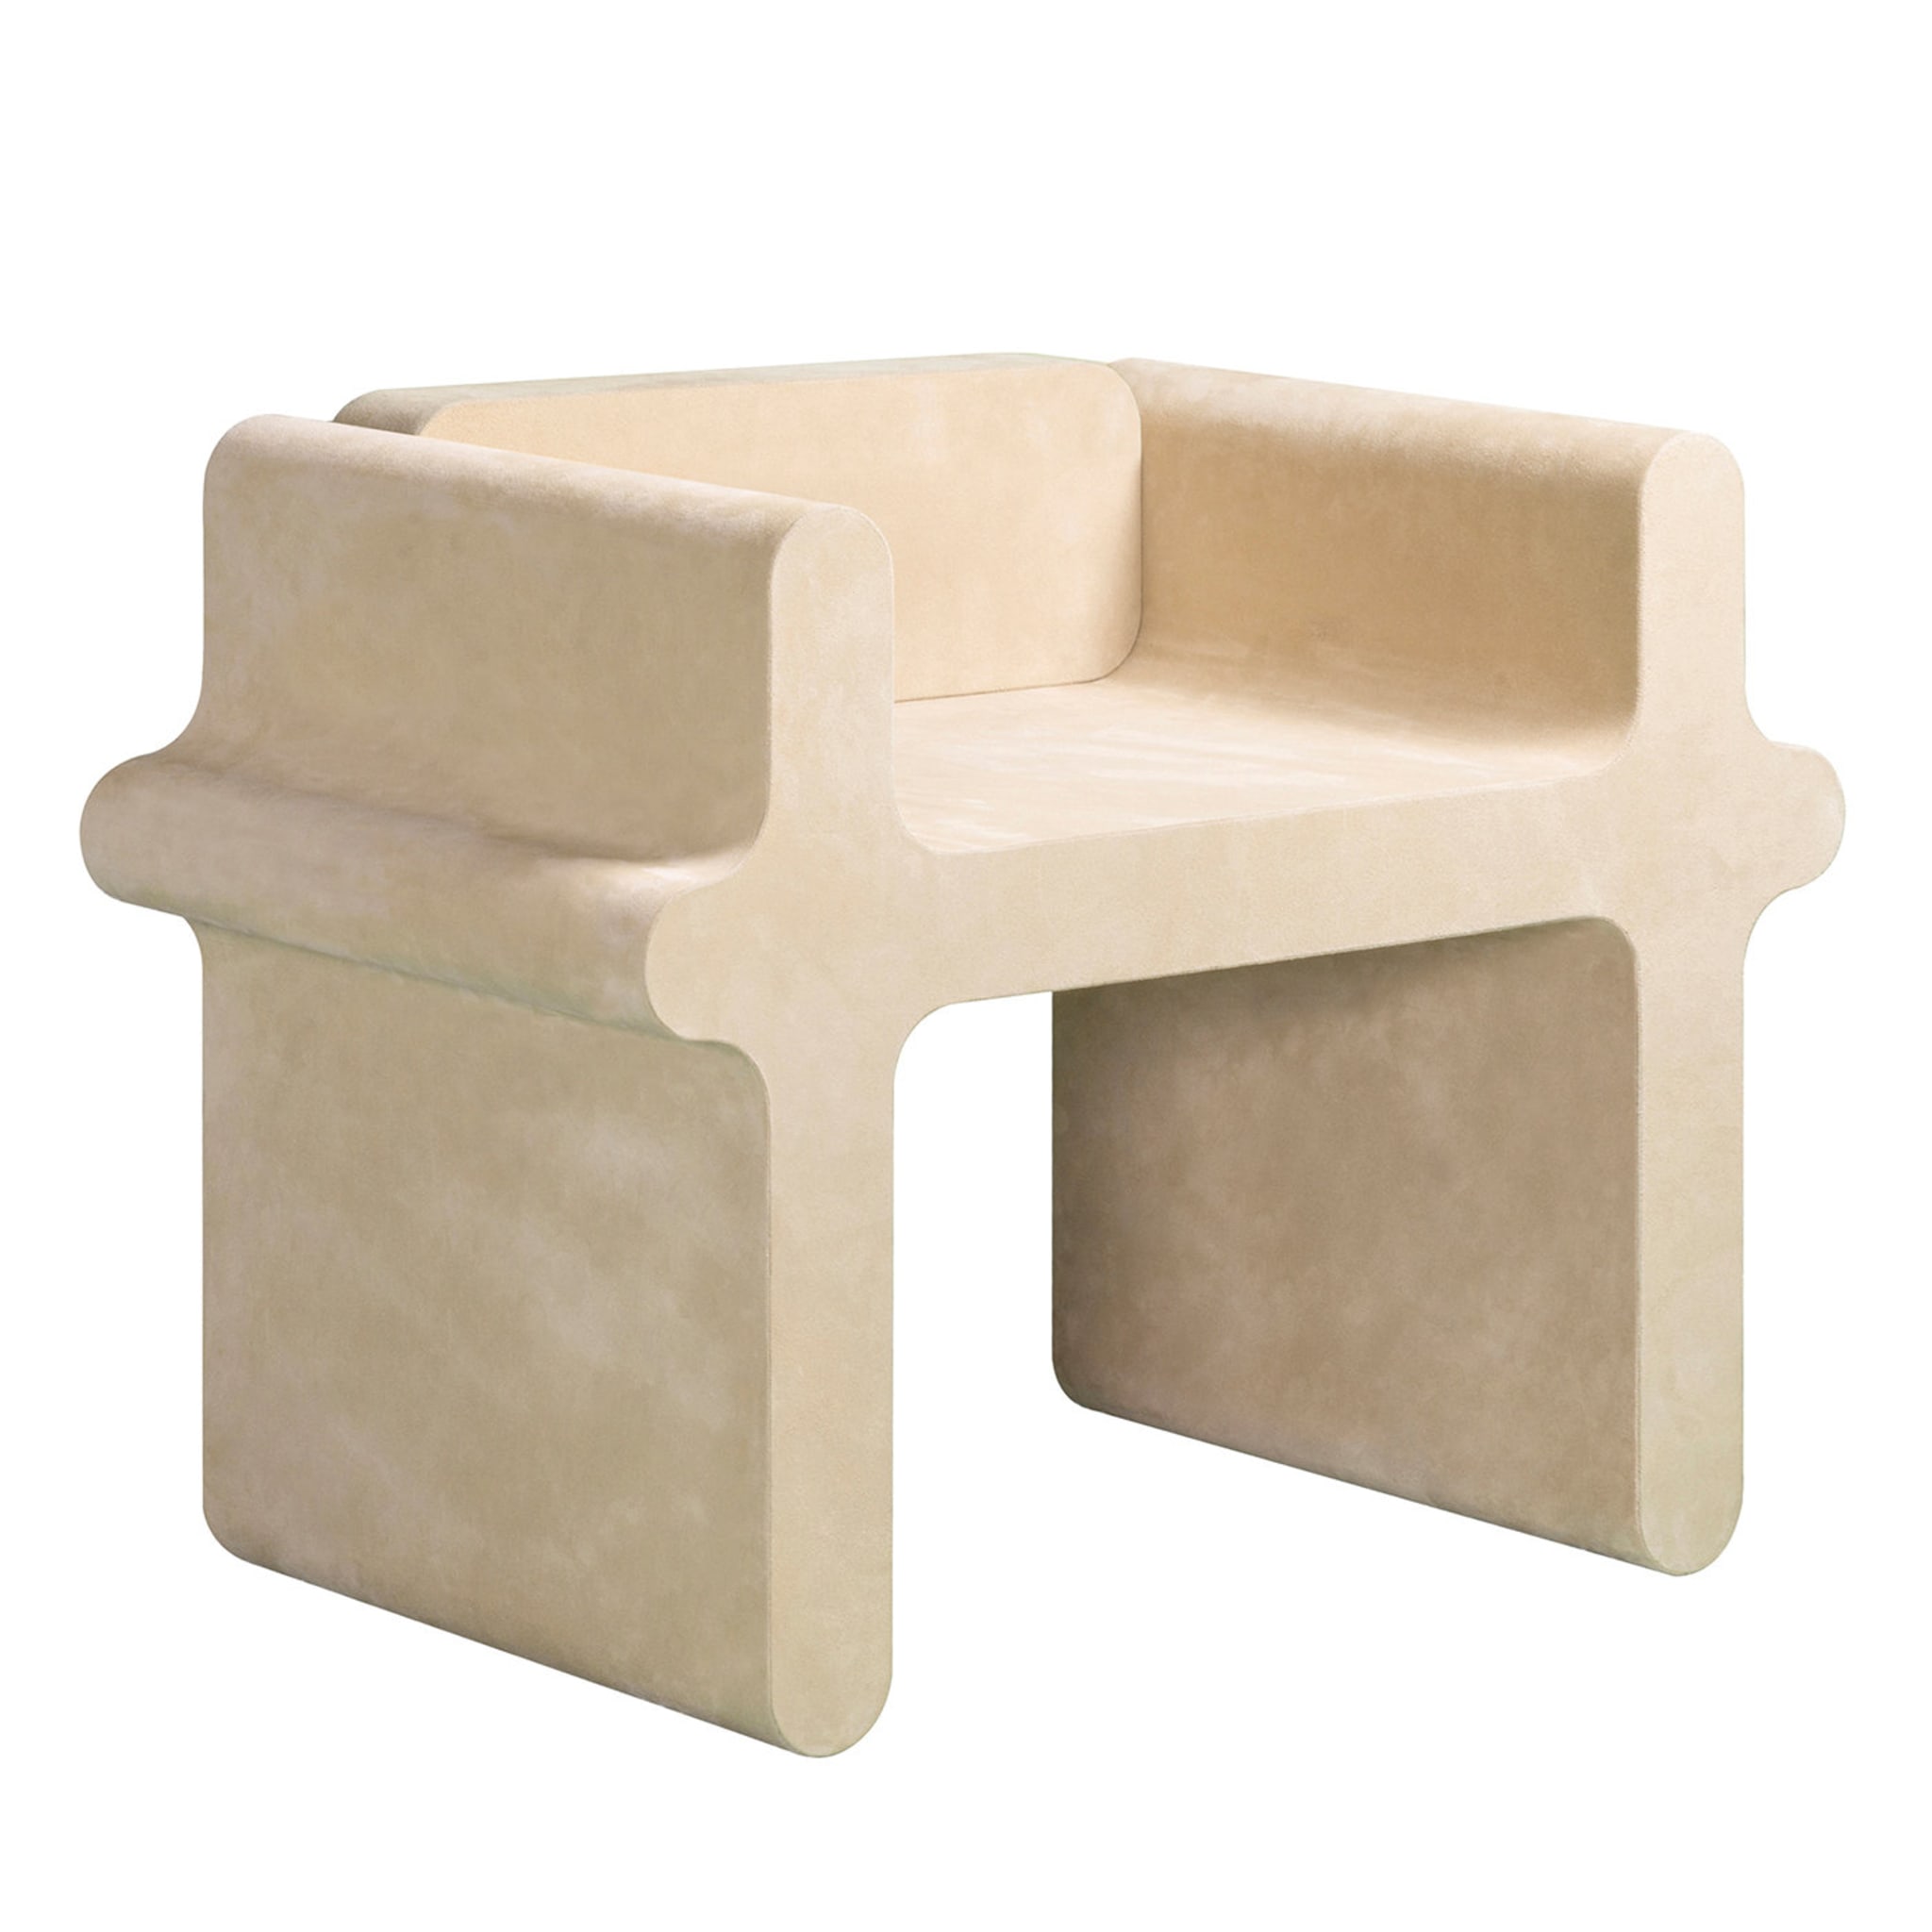 Ossicle Beige Leather Stool N. 2 - Main view